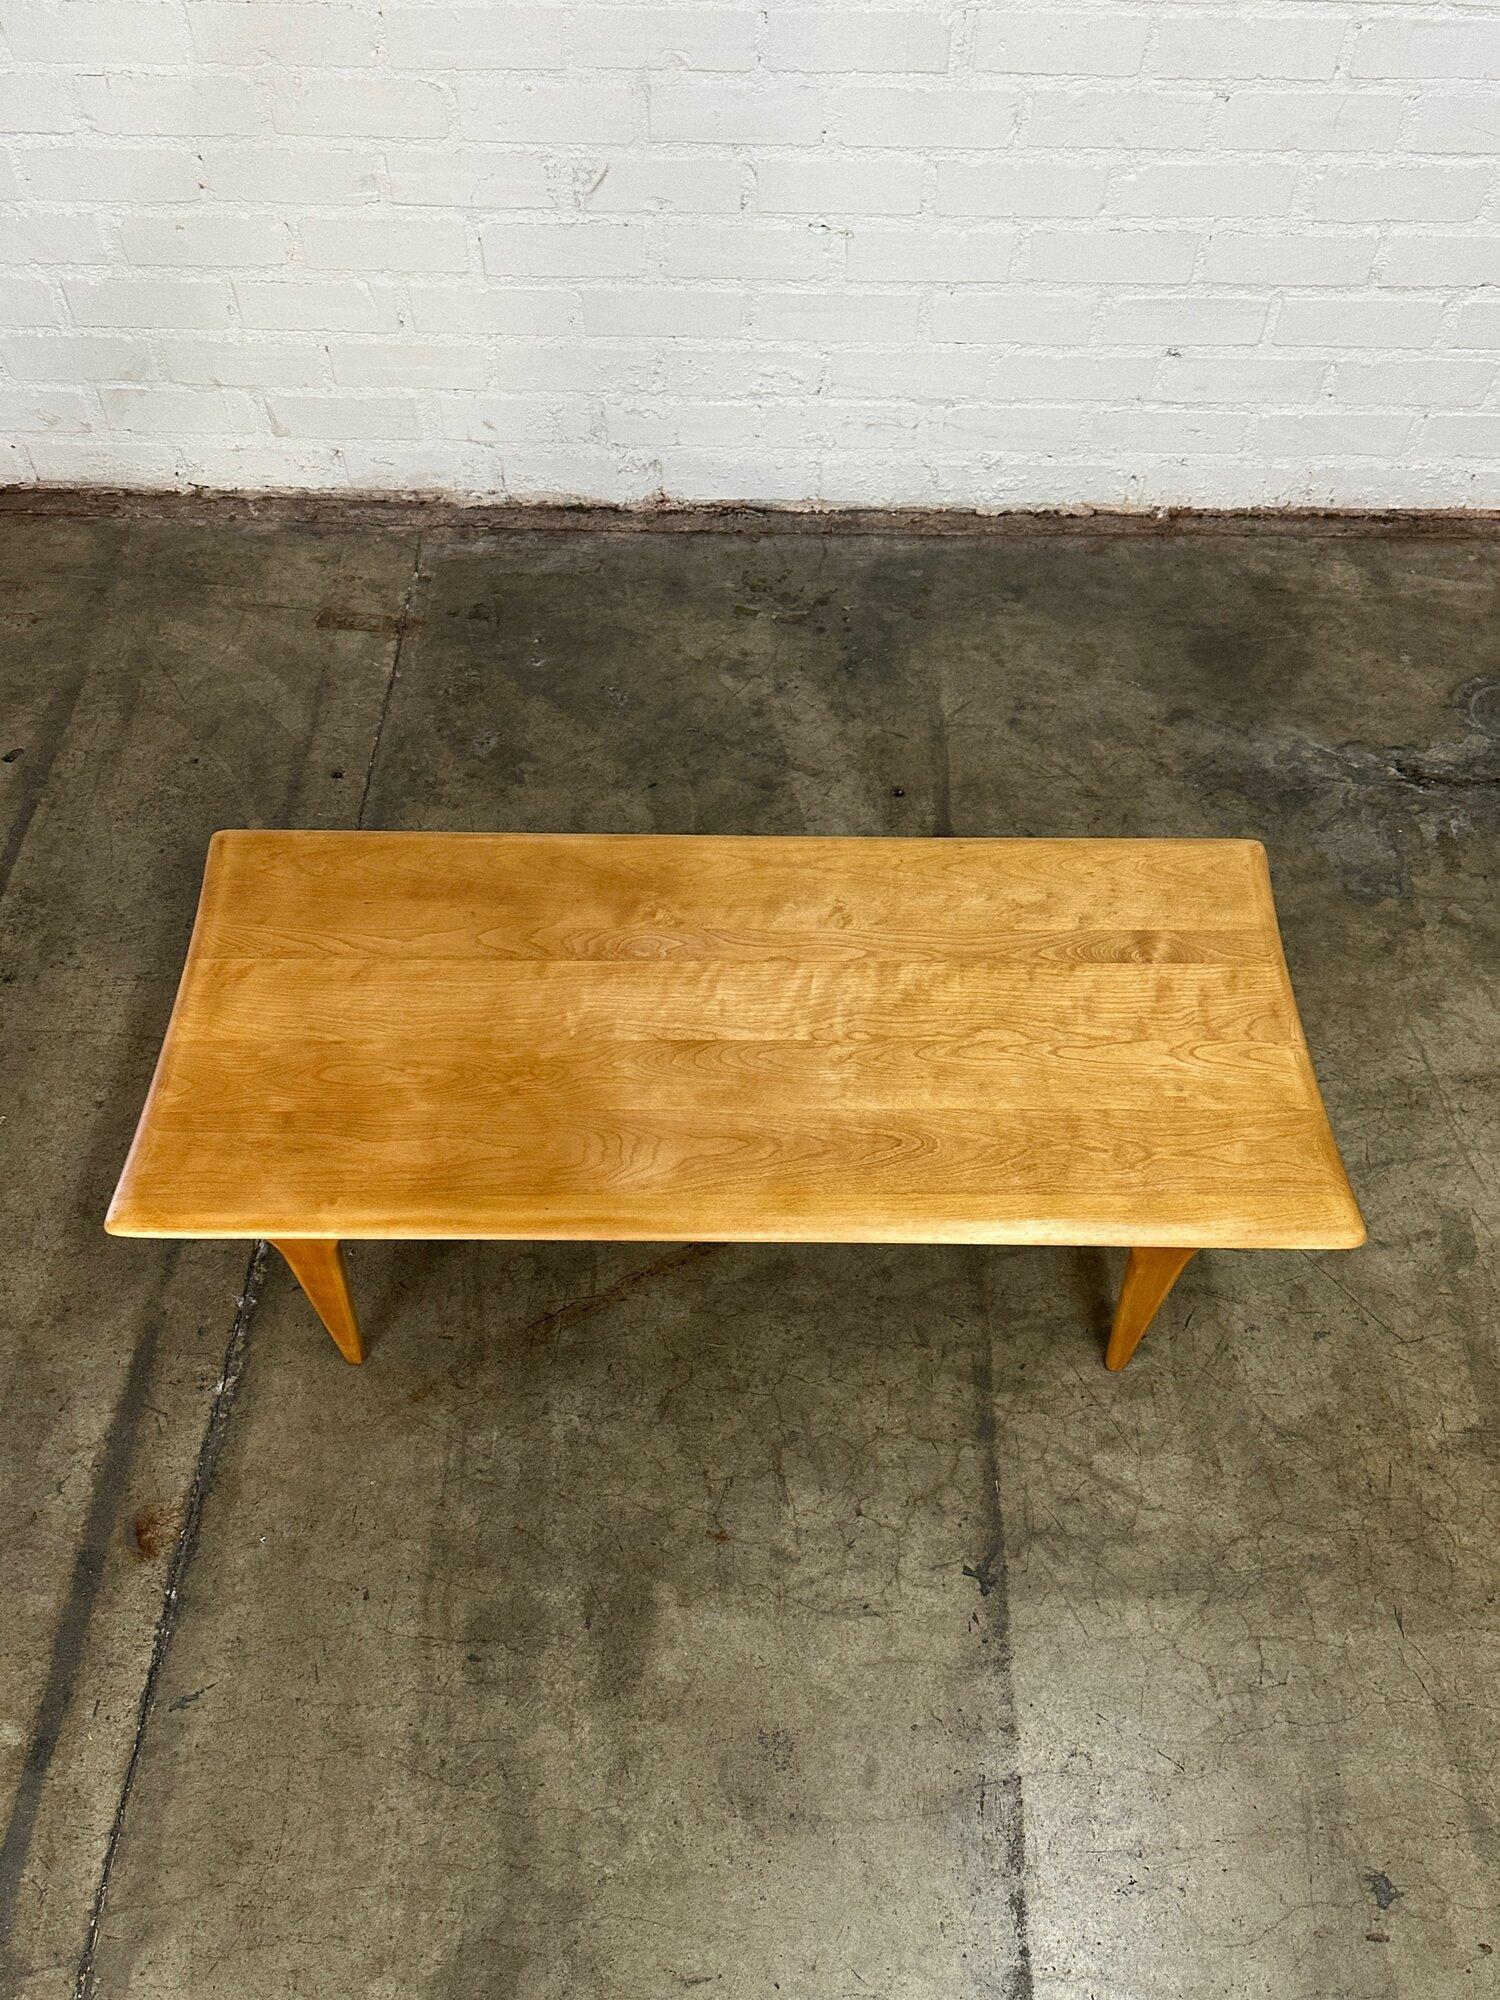 W49.5 D22 H15

Fully restored Heywood coffee table. Item shows well with no major area of wear. Item features solid wooden construction with nice sculptural lines. 